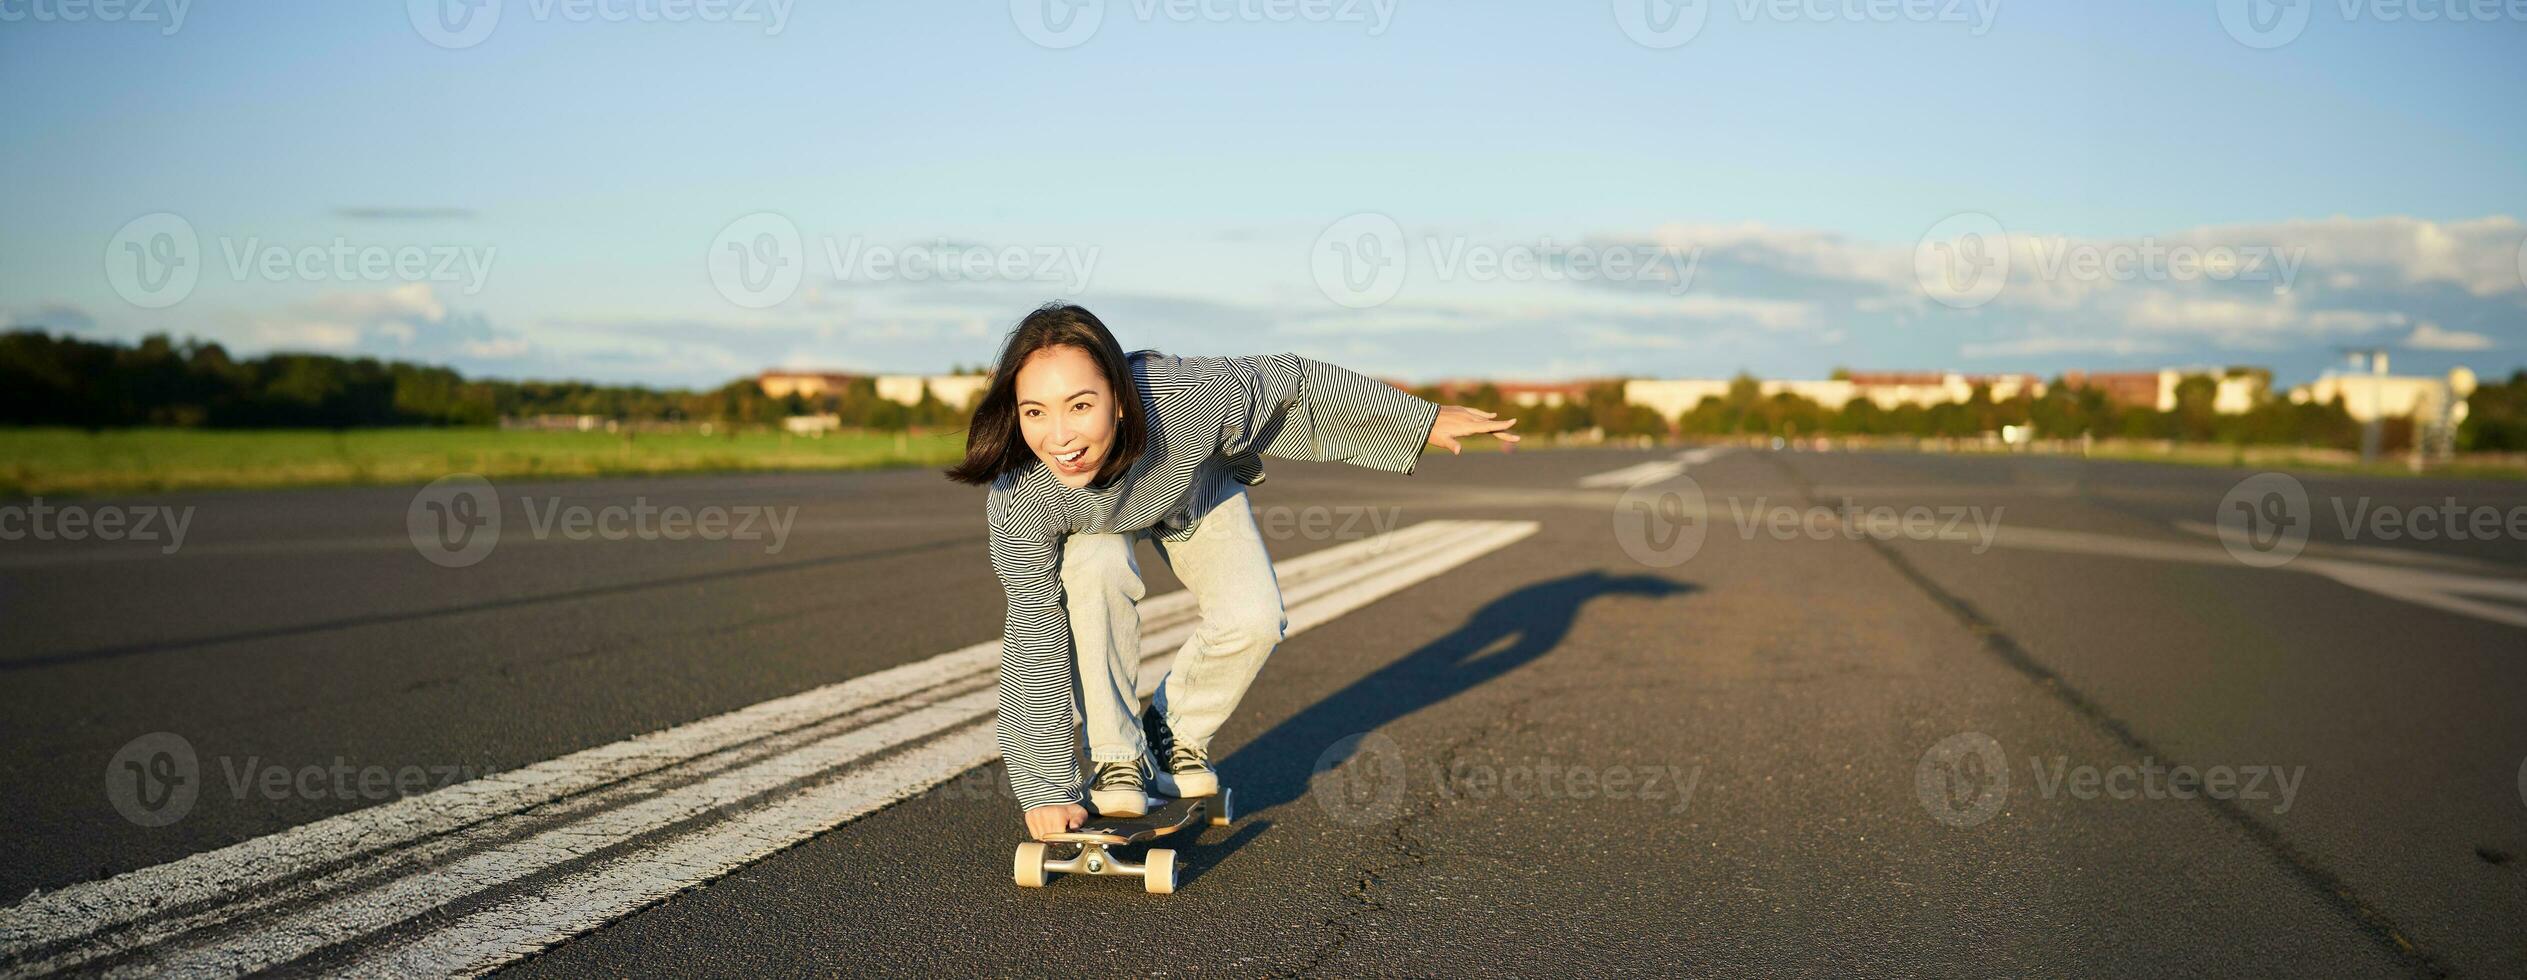 Carefree skater girl on her skateboard, riding longboard on an empty road, holding hands sideways and laughing photo